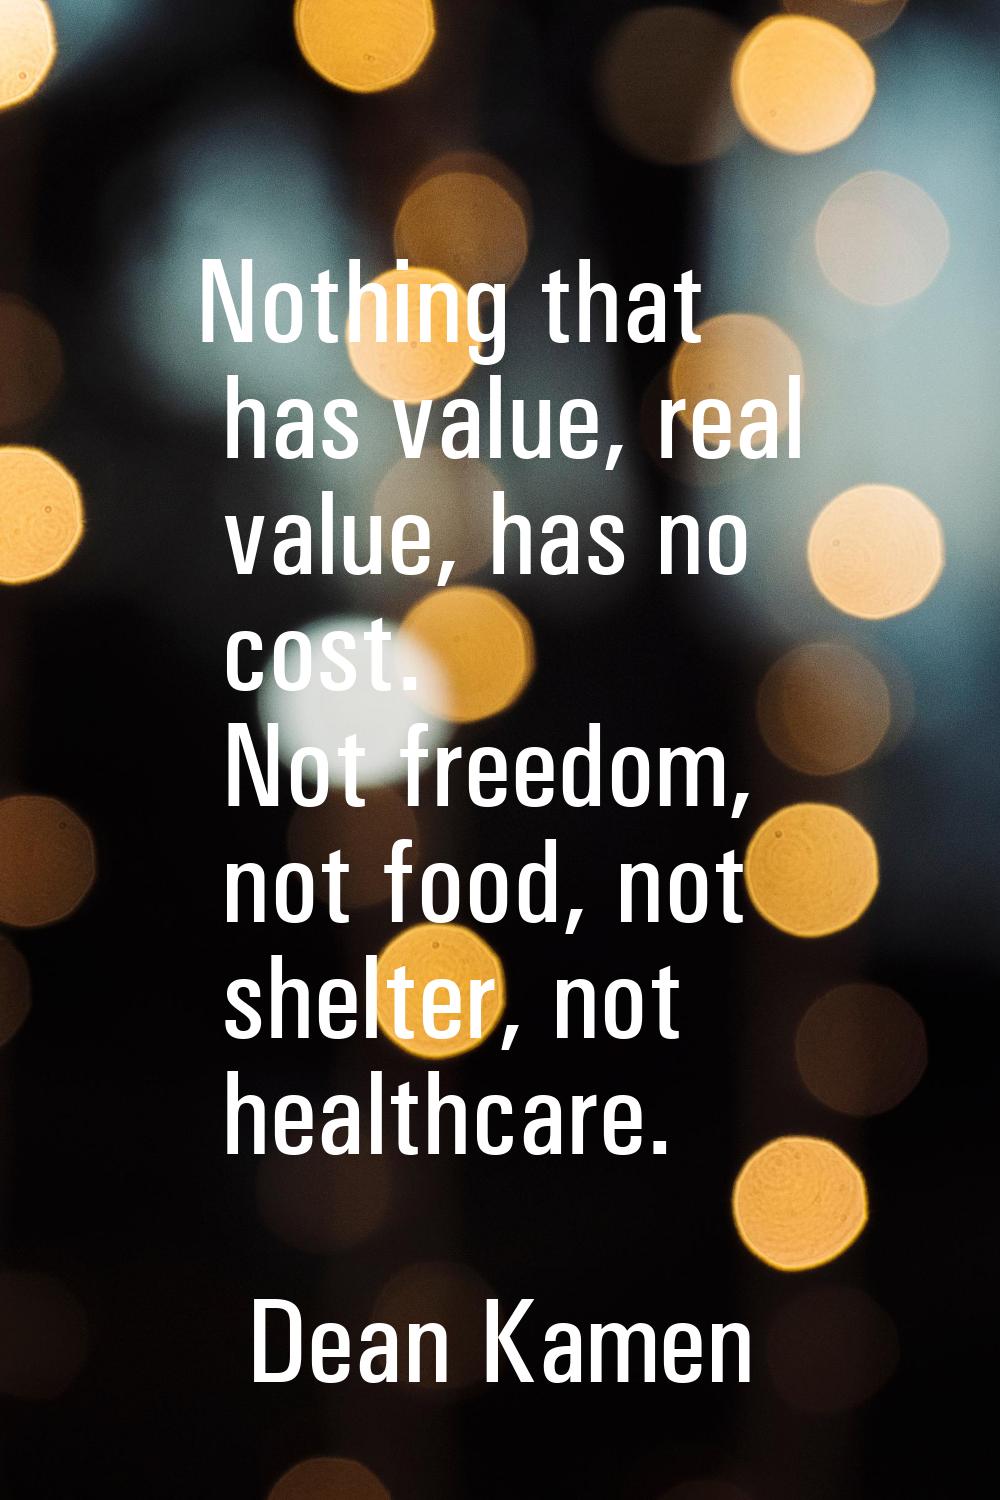 Nothing that has value, real value, has no cost. Not freedom, not food, not shelter, not healthcare